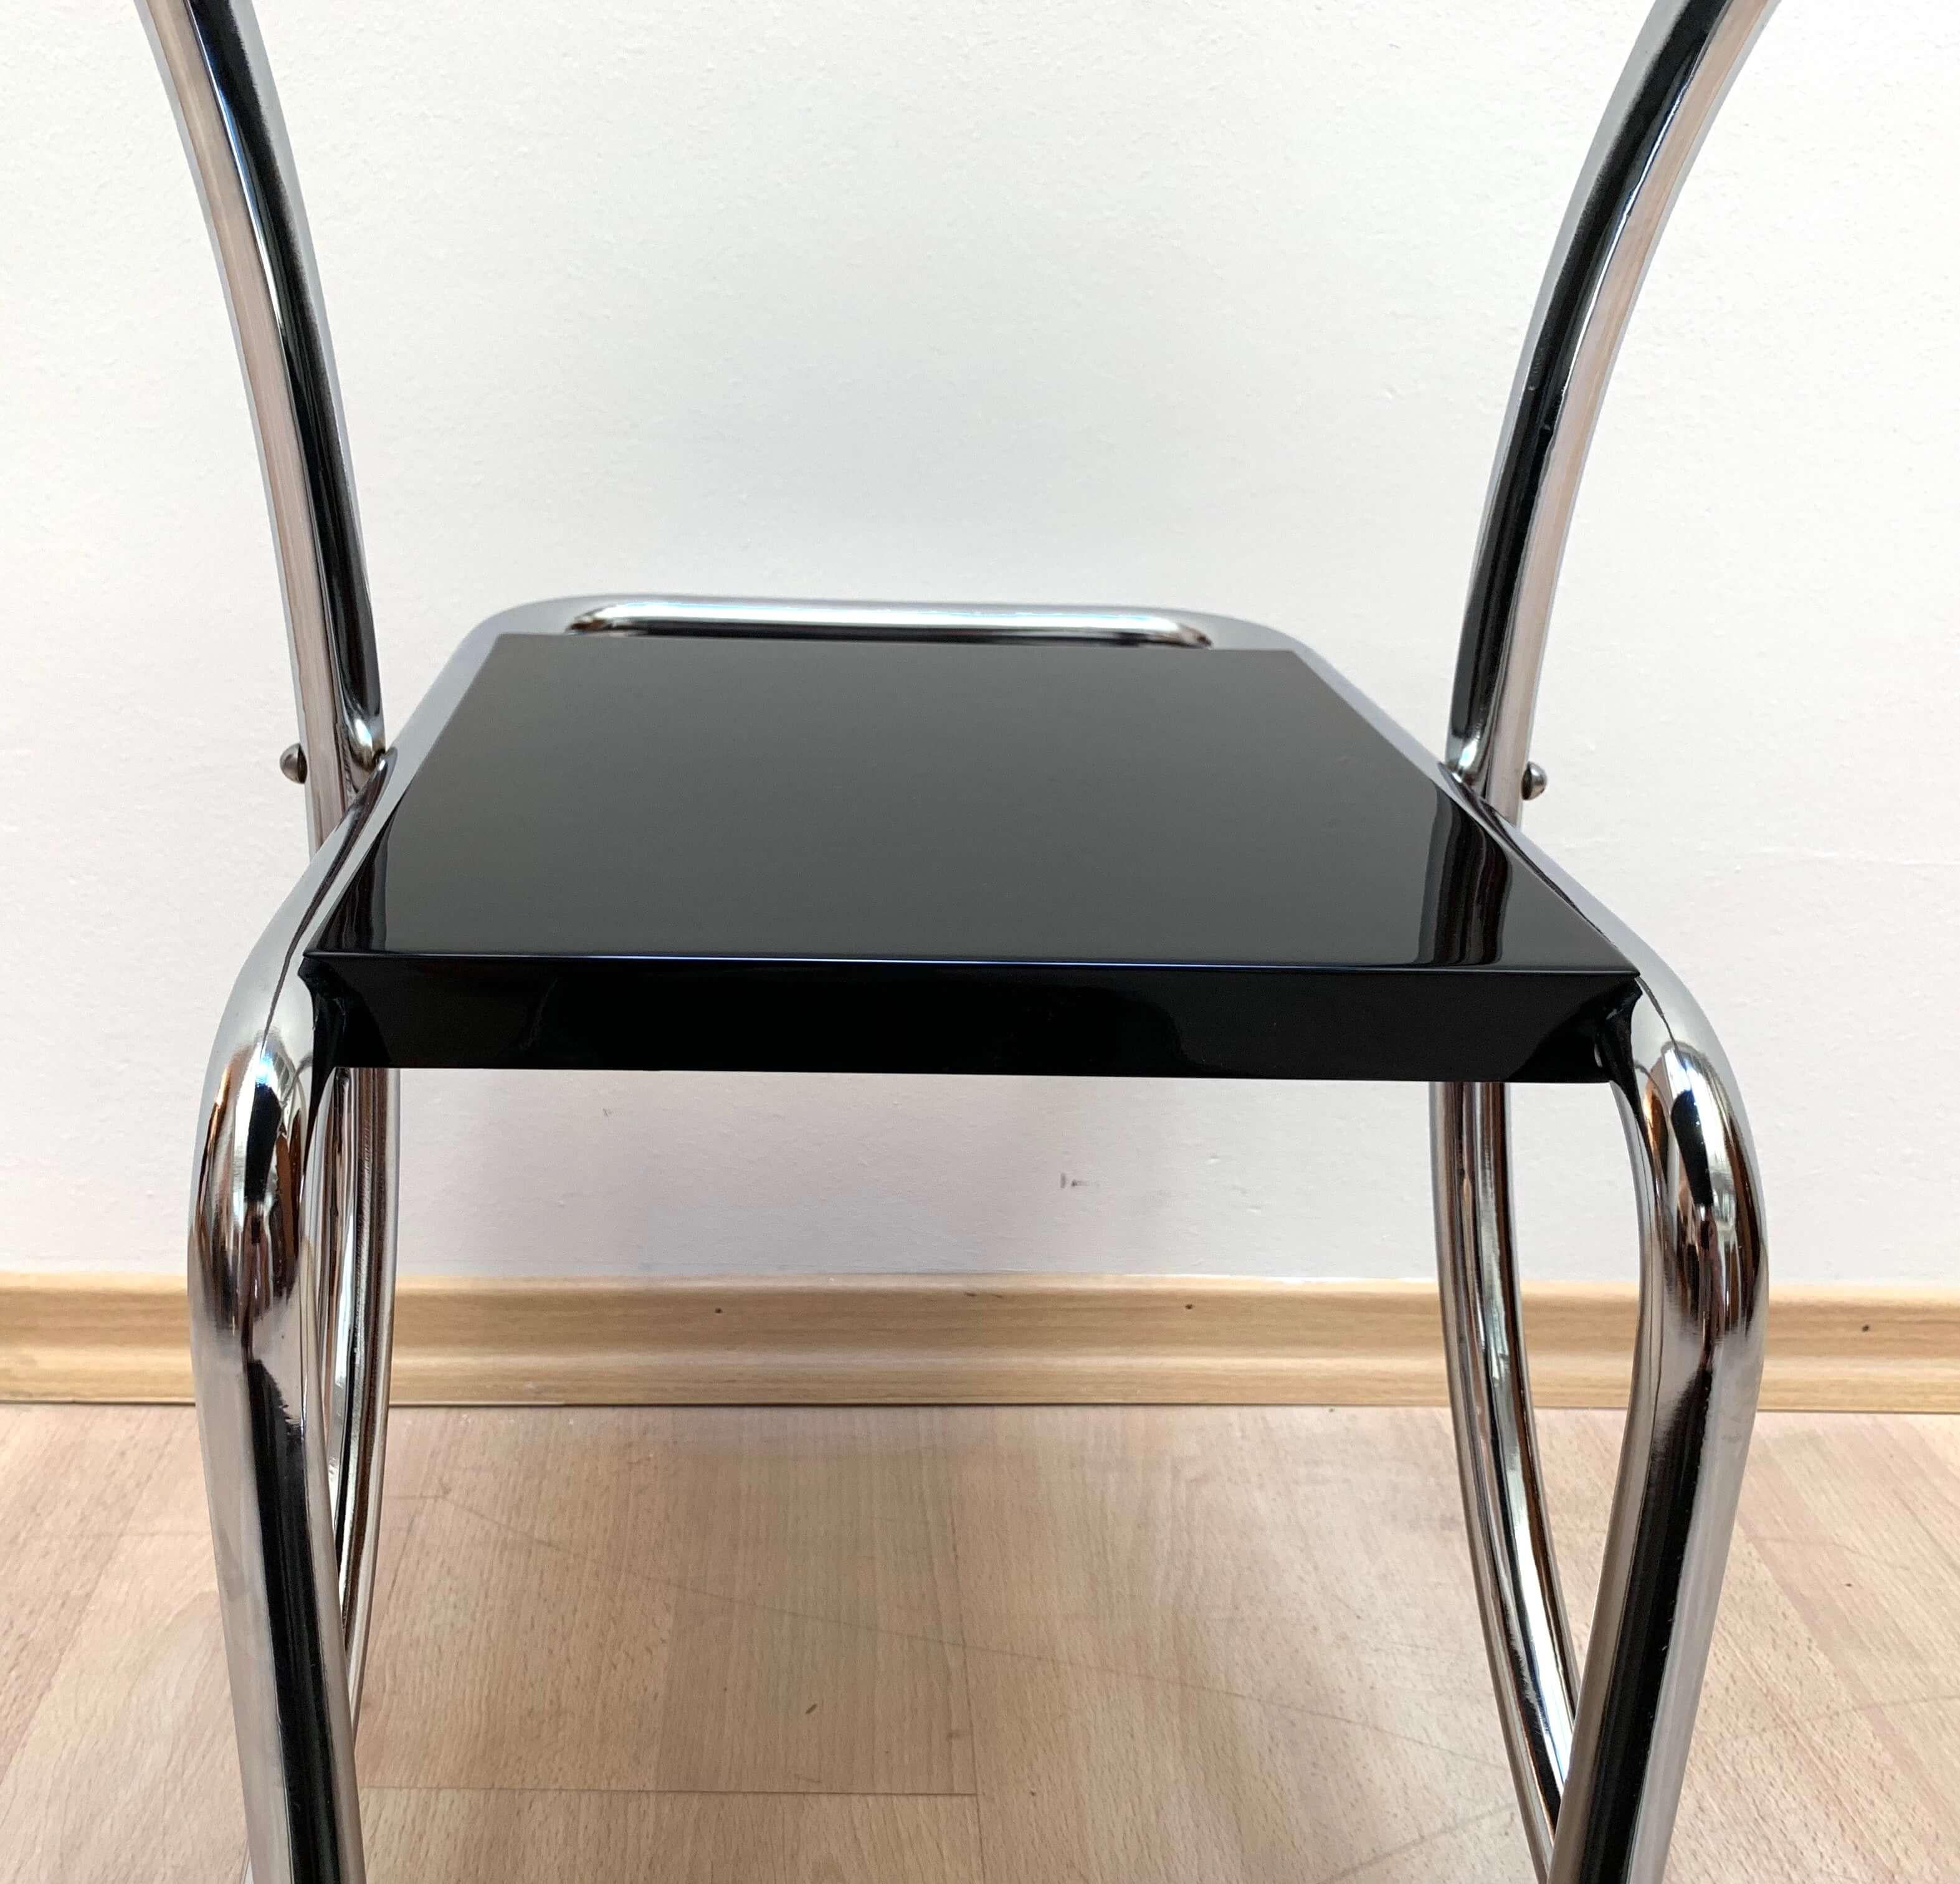 Bauhaus Steeltube Étagère, Nickel and Black Lacquer, Germany/Czechia, 1930s For Sale 4